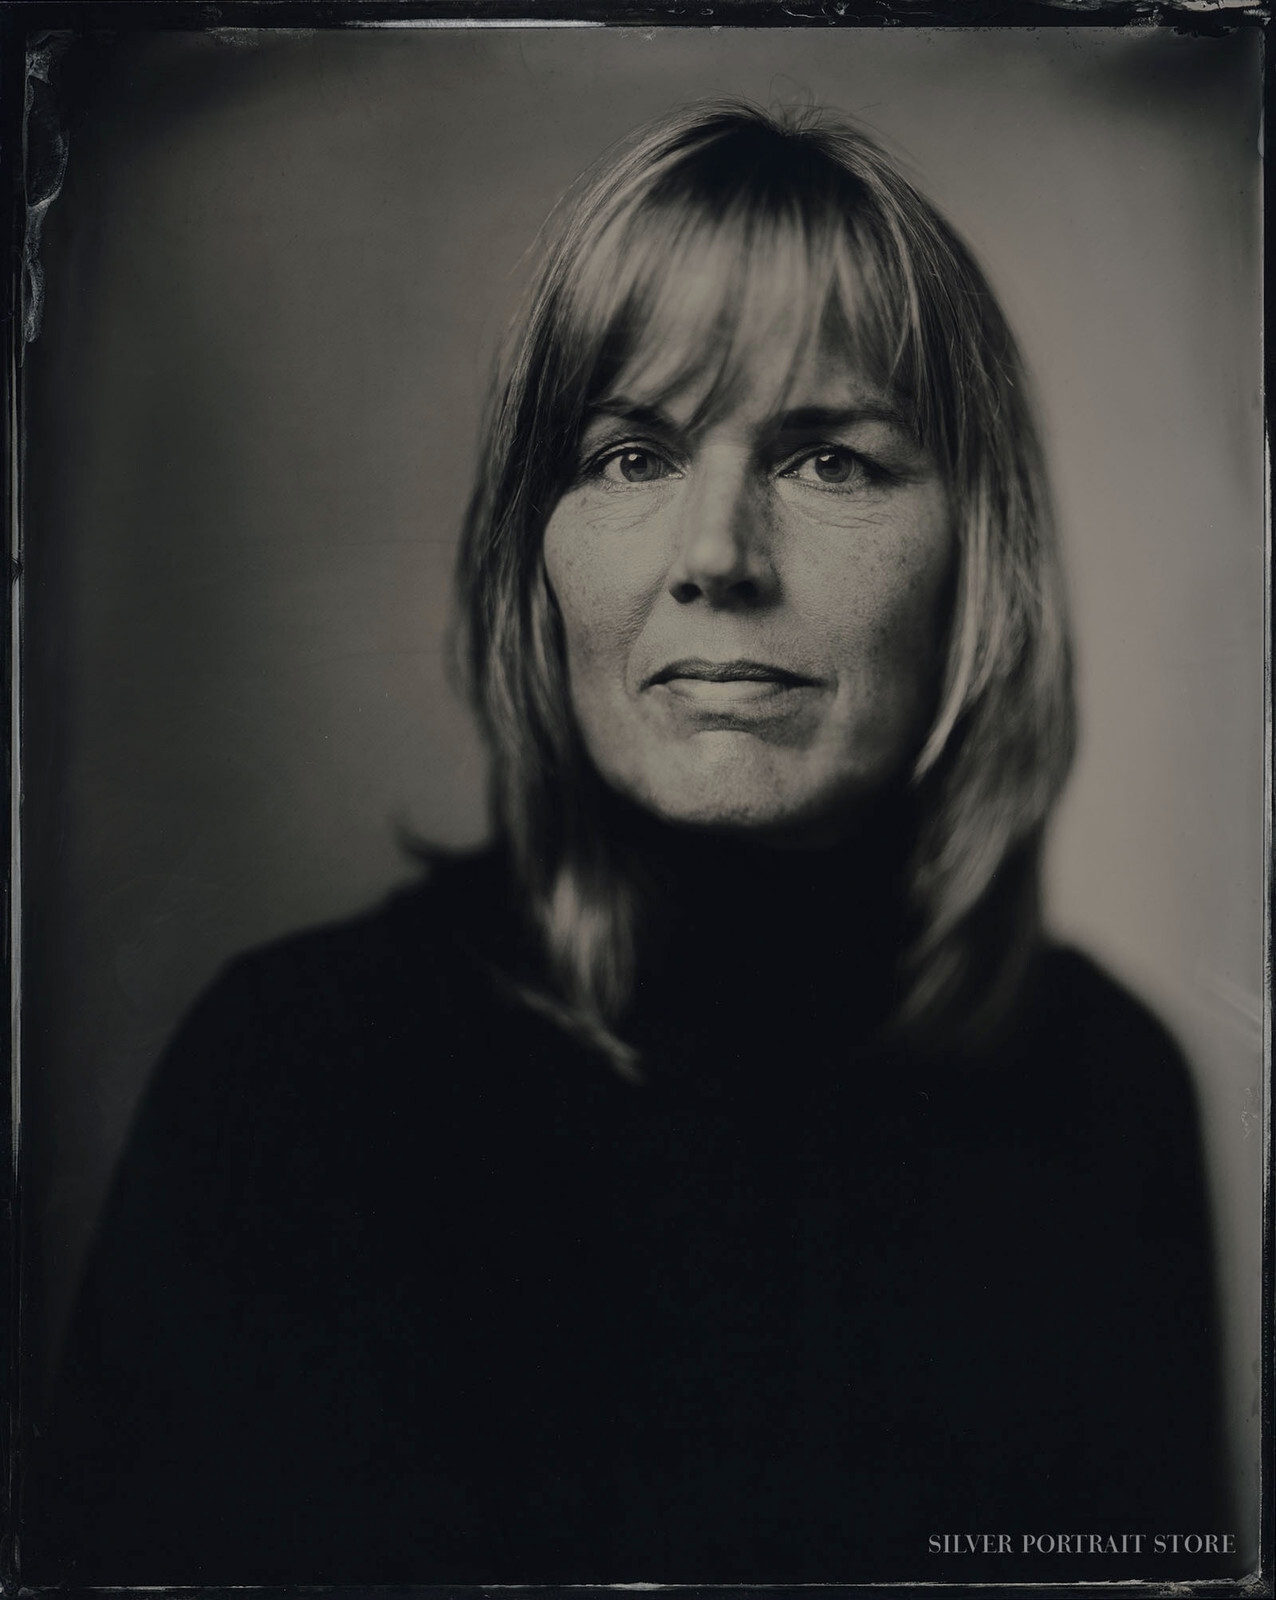 Ruth-Silver Portrait Store-scan from Wet plate collodion-Tintype 20 x 25 cm.